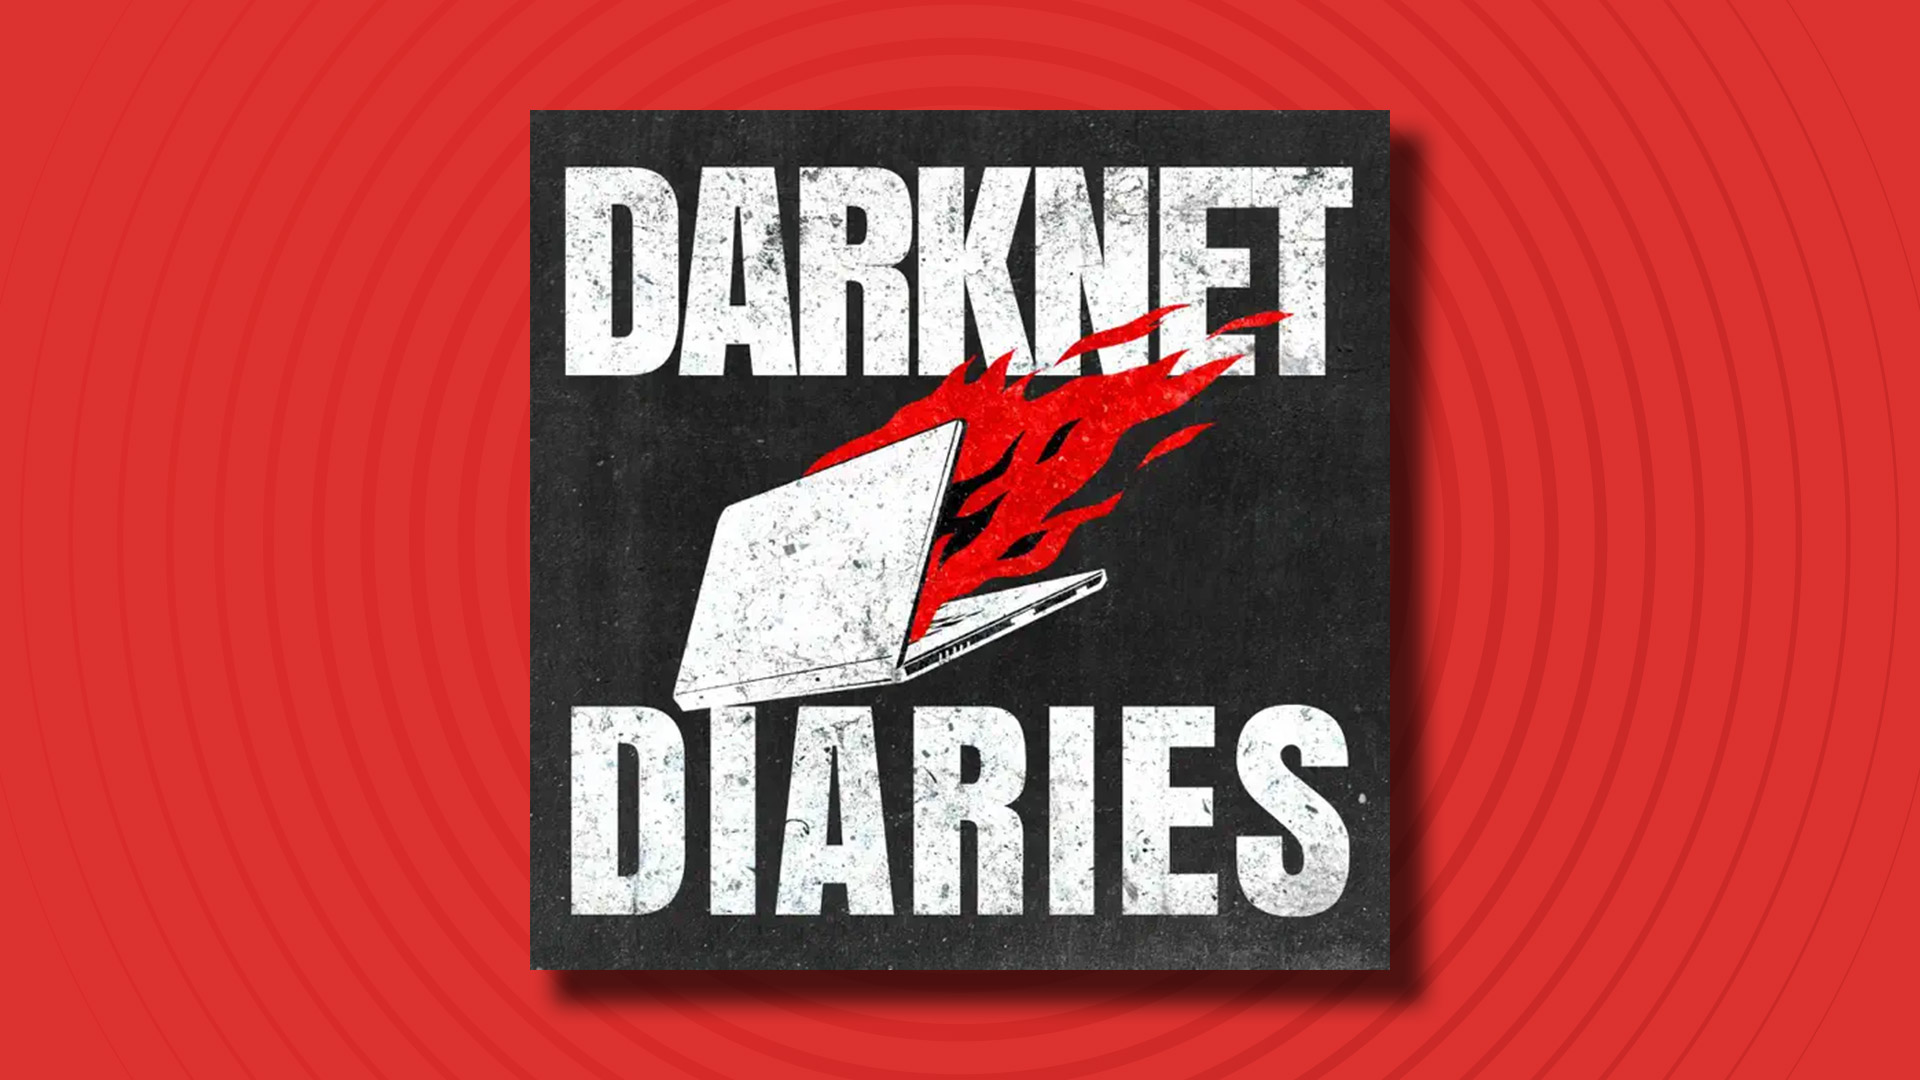 The logo of the Darknet Diaries podcast on a red background